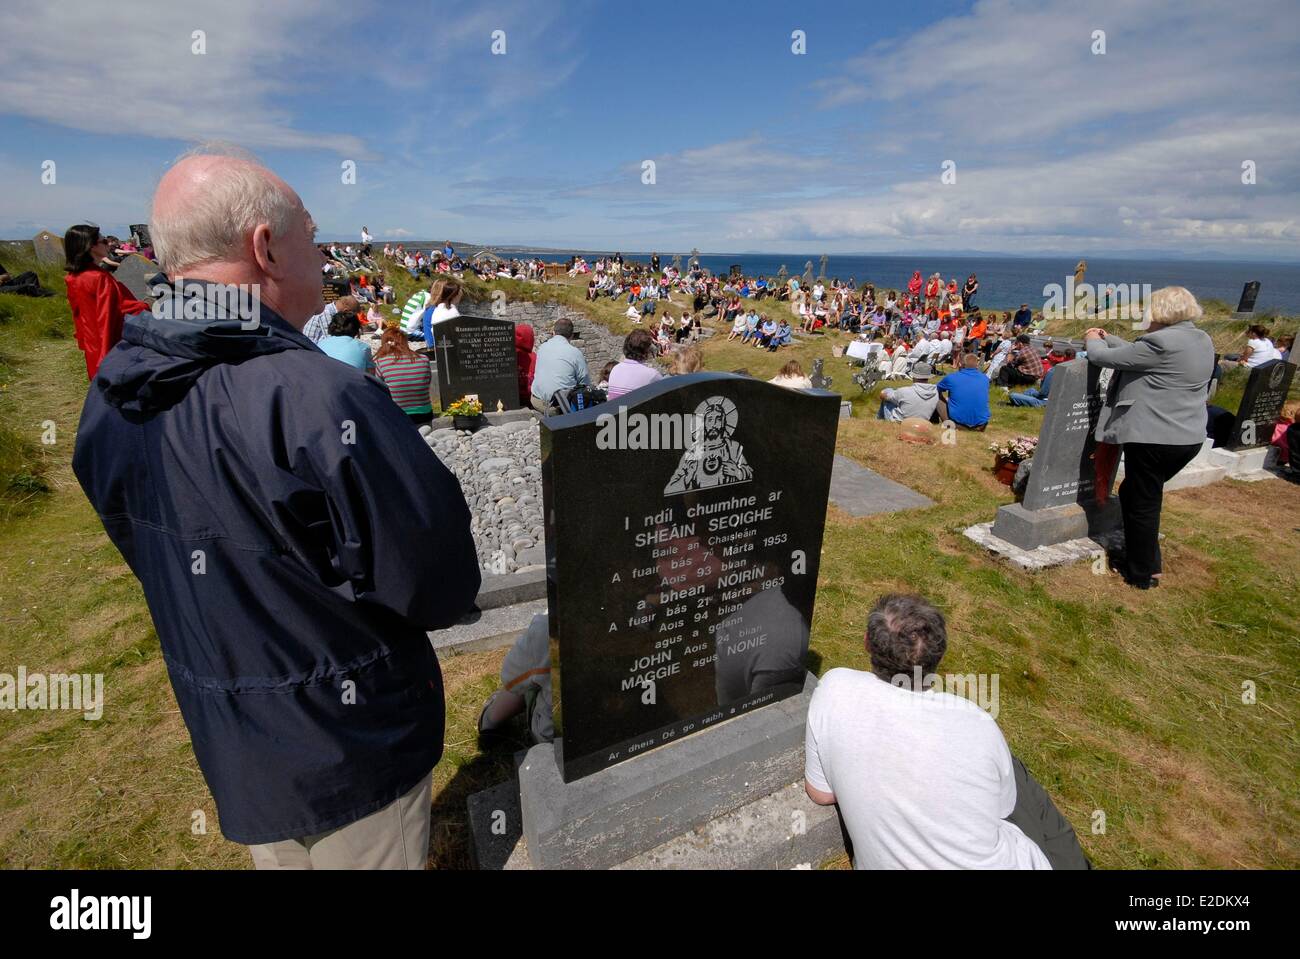 Ireland County Galway Aran Islands Inisheer Teampall Caomhan church of Saint Kevin of 10th century open-air mass Saint Kevin is Stock Photo